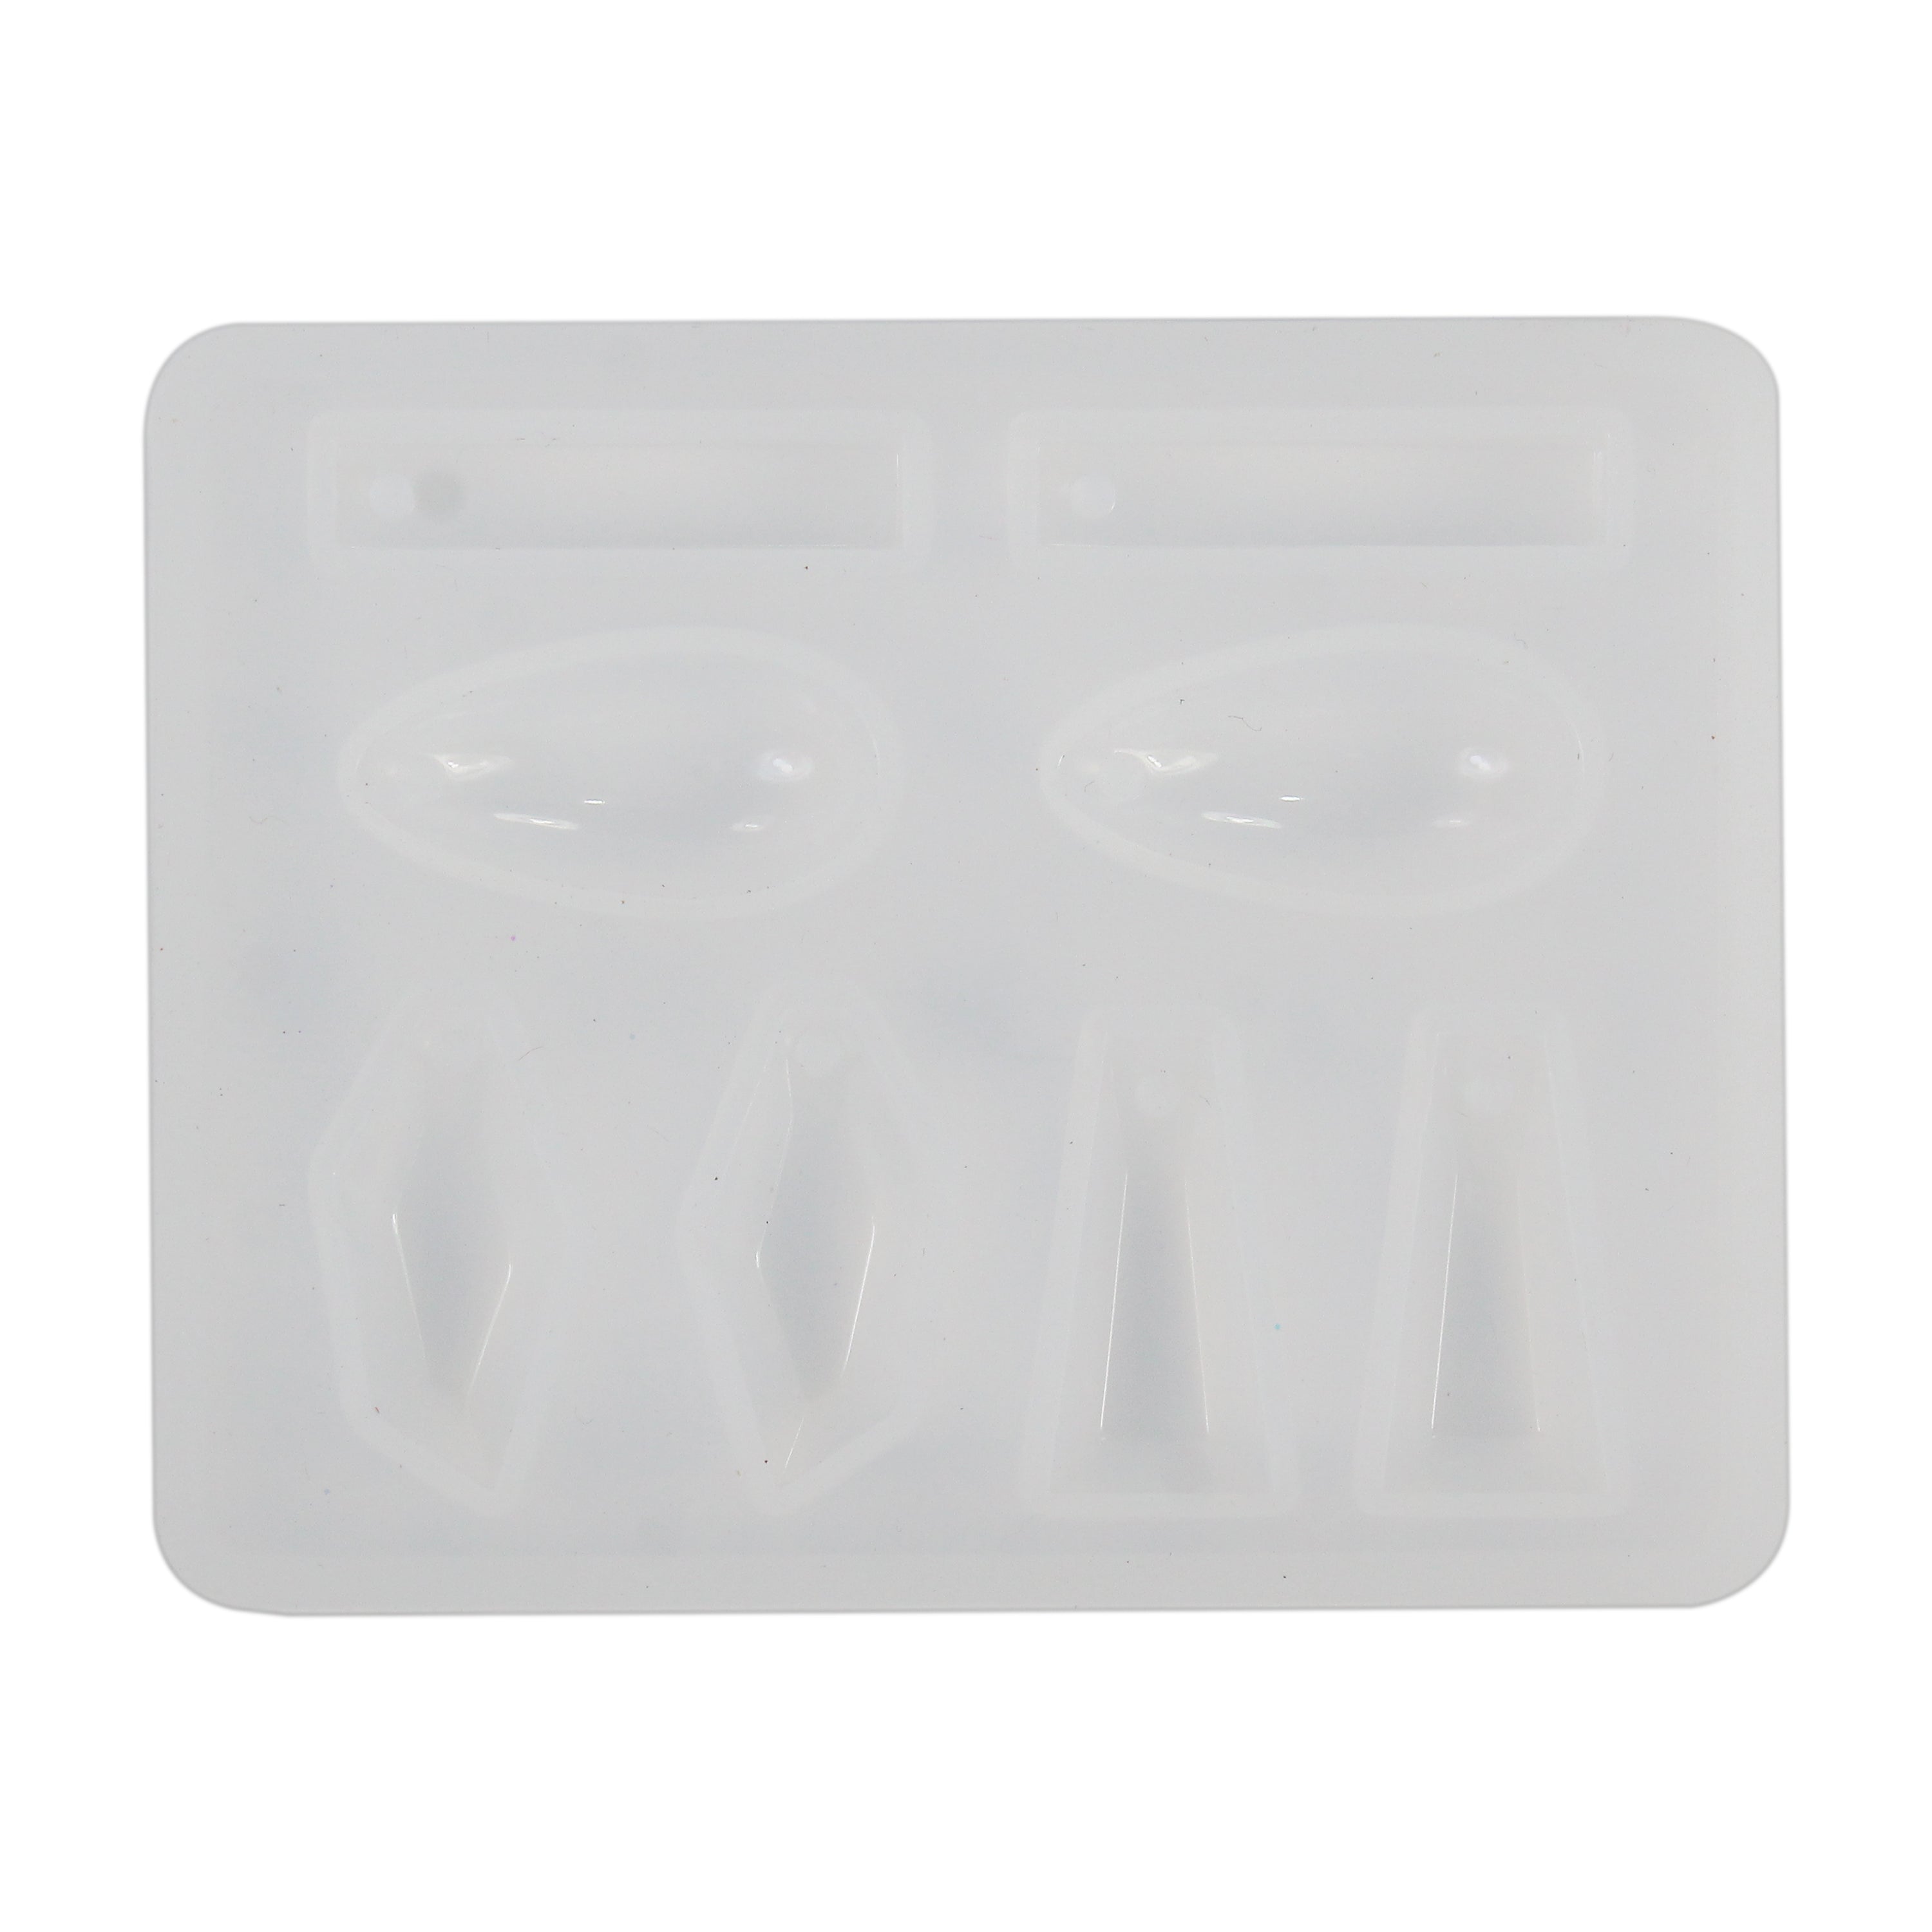 Diffuser Silicone Mould/Earring Pendant Mould 6.8X5.3X0.5Cm 1Pc Ib